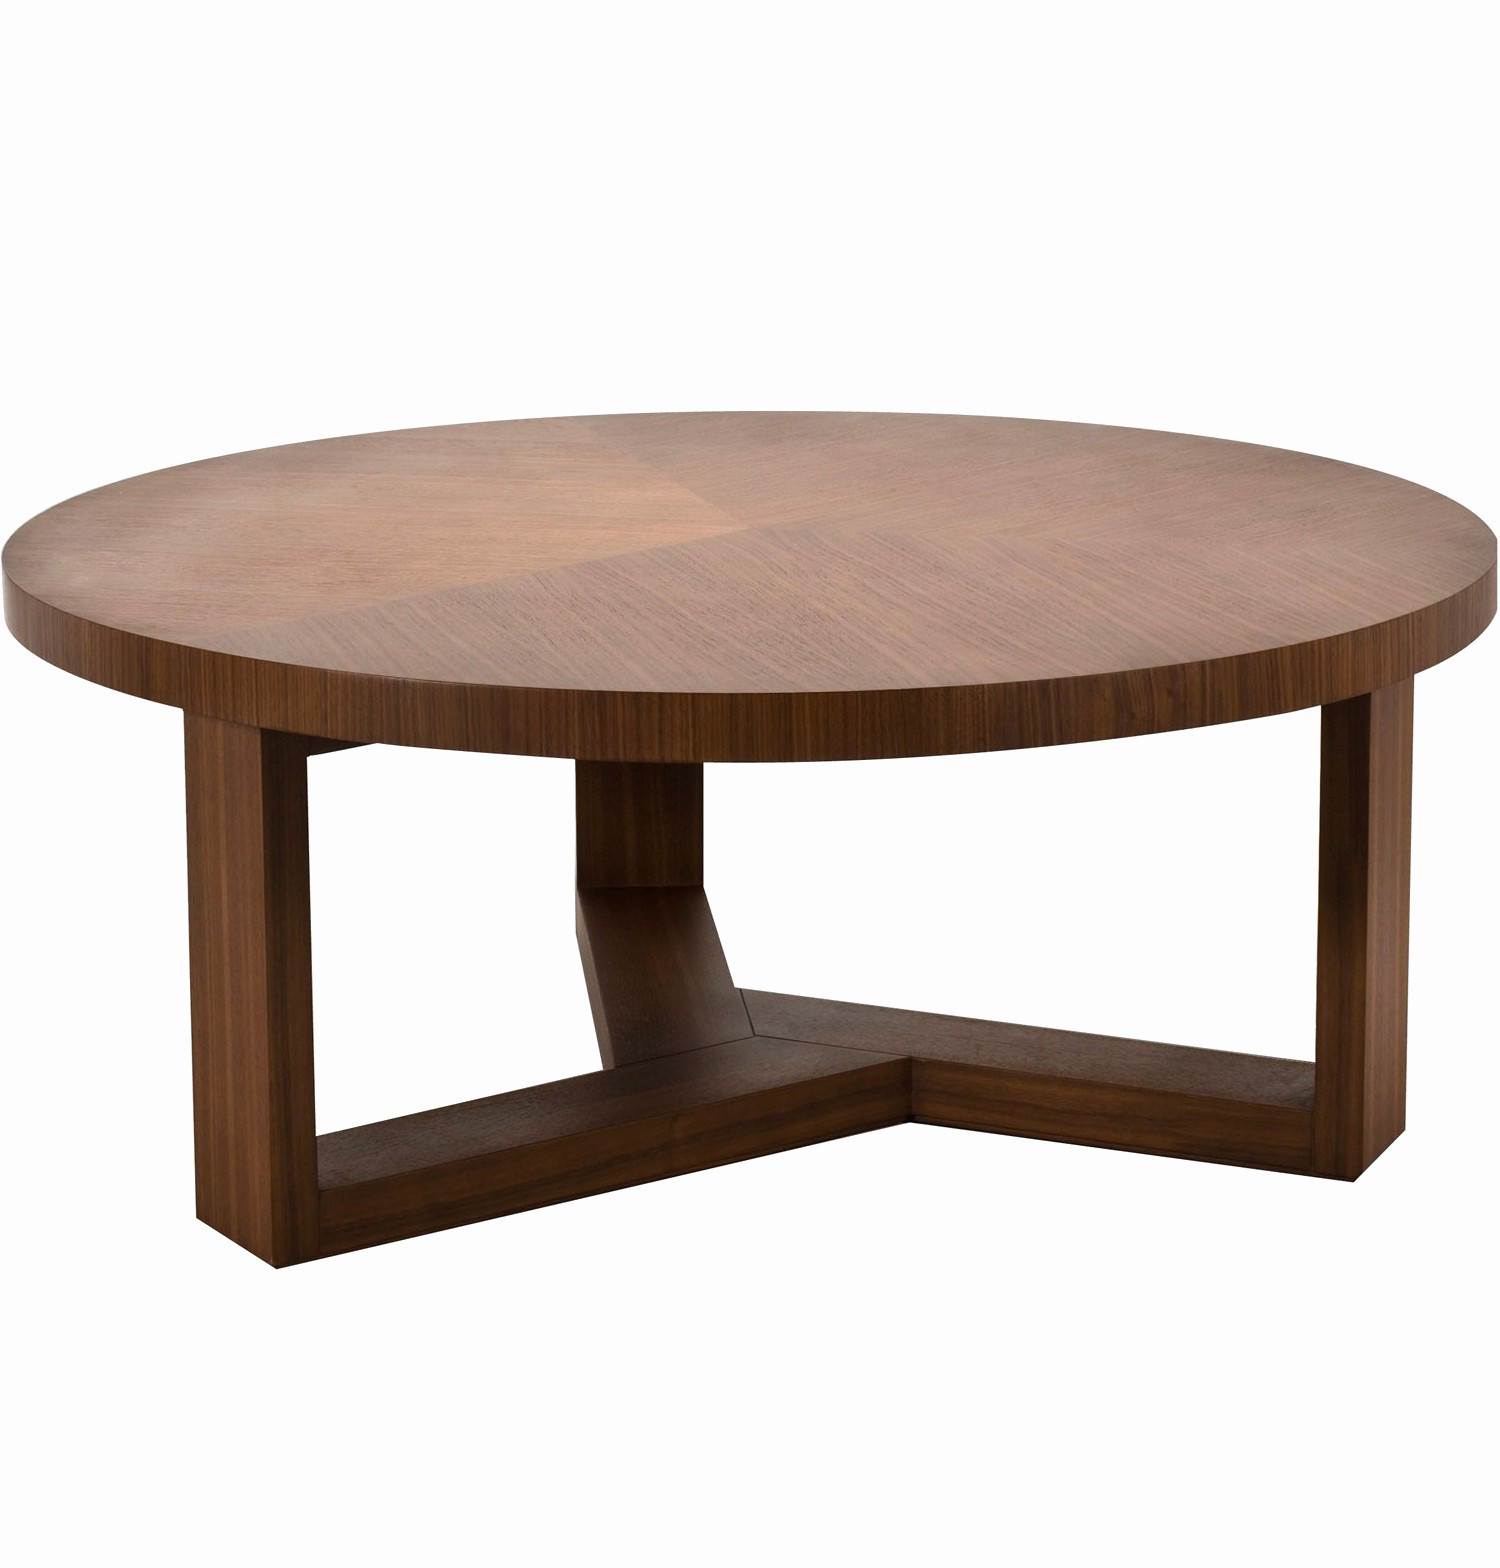 outdoor side table plans stock adirondack woodworking graphies coffee unique diy sectional tablecloth round accent modern home furniture pedestal wood nautical hanging light